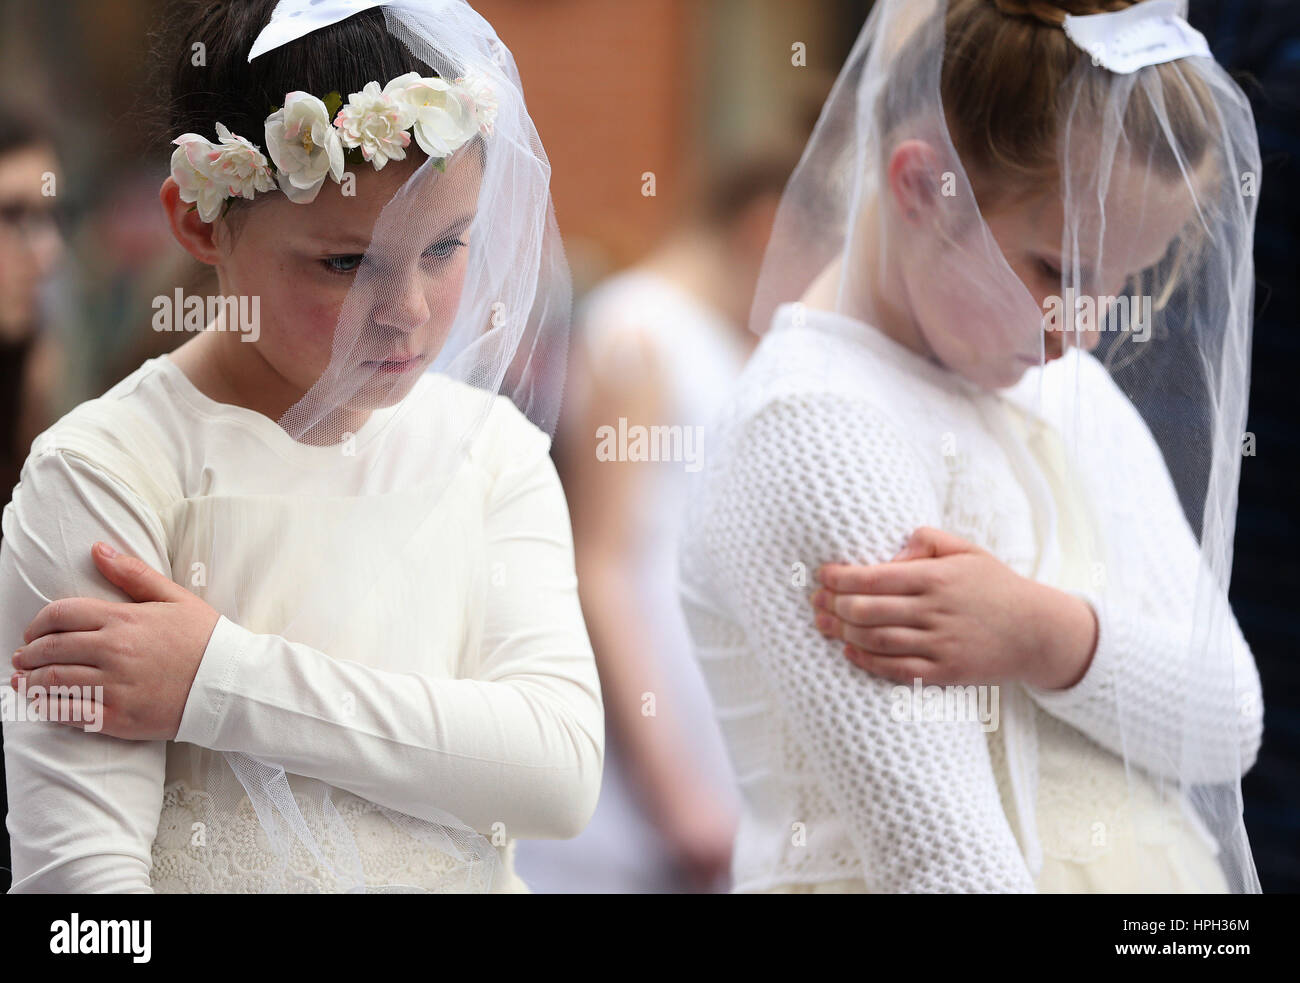 Girls dressed as child brides take part in a 'mannequin challenge' on Dublin's South King Street, organised by child rights organisation Plan International Ireland, to show support for the 16.5 million girls who are globally displaced because of conflict or persecution. Stock Photo